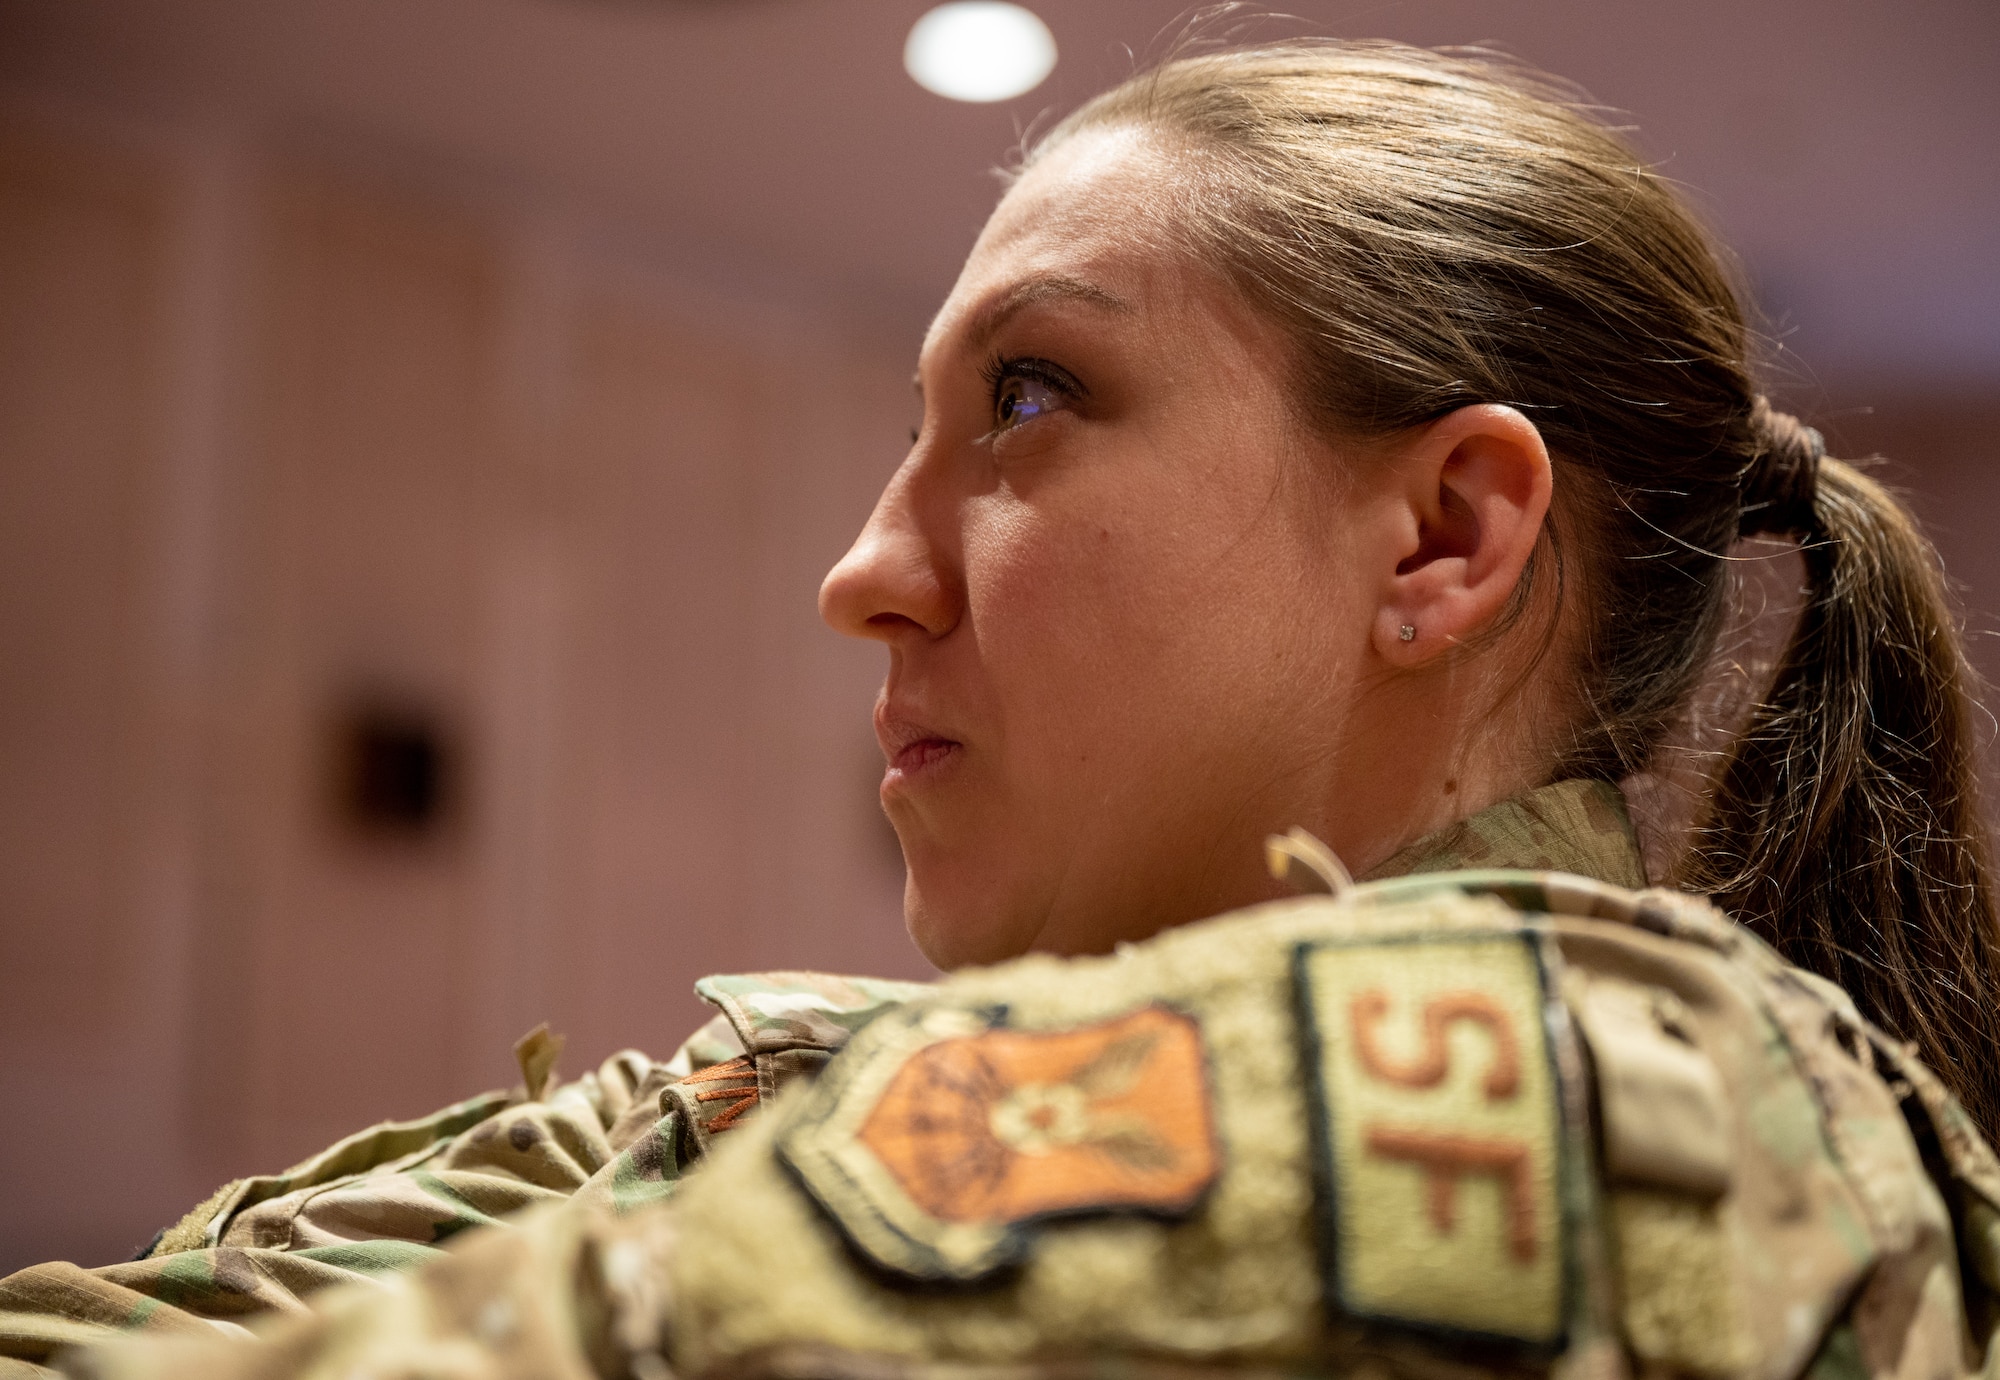 Tech. Sgt. Kellie Sawn, 28th Security Forces Squadron unit deployment manager, listens to a guest speaker’s lecture during a Women’s Conference at Ellsworth Air Force Base, S.D., March 2, 2022.